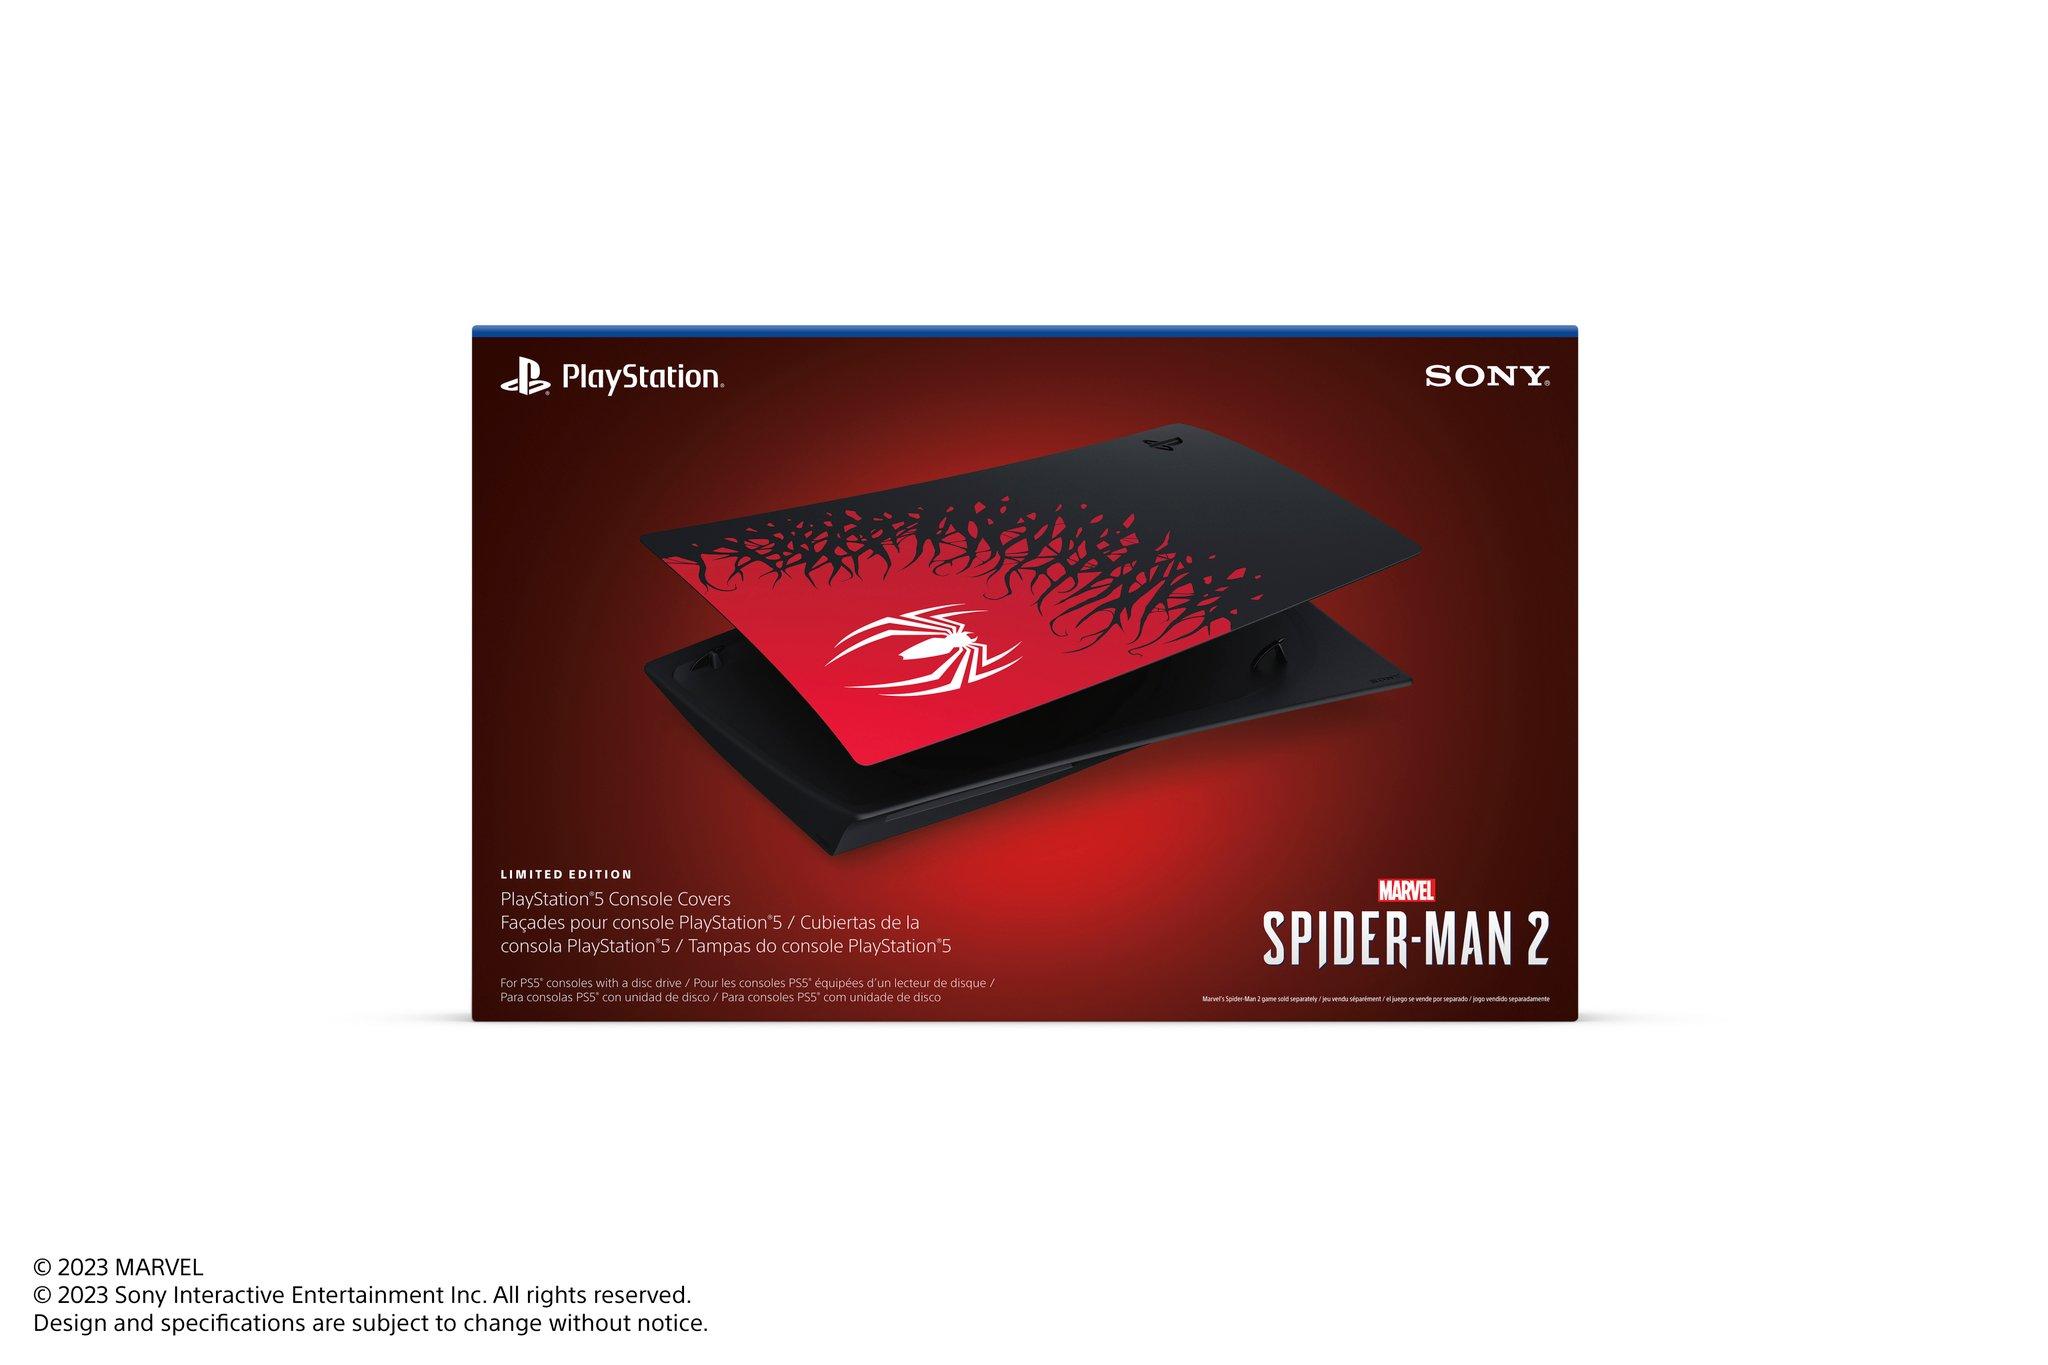 Console Sony PS5 e Marvel's Spider-Man 2